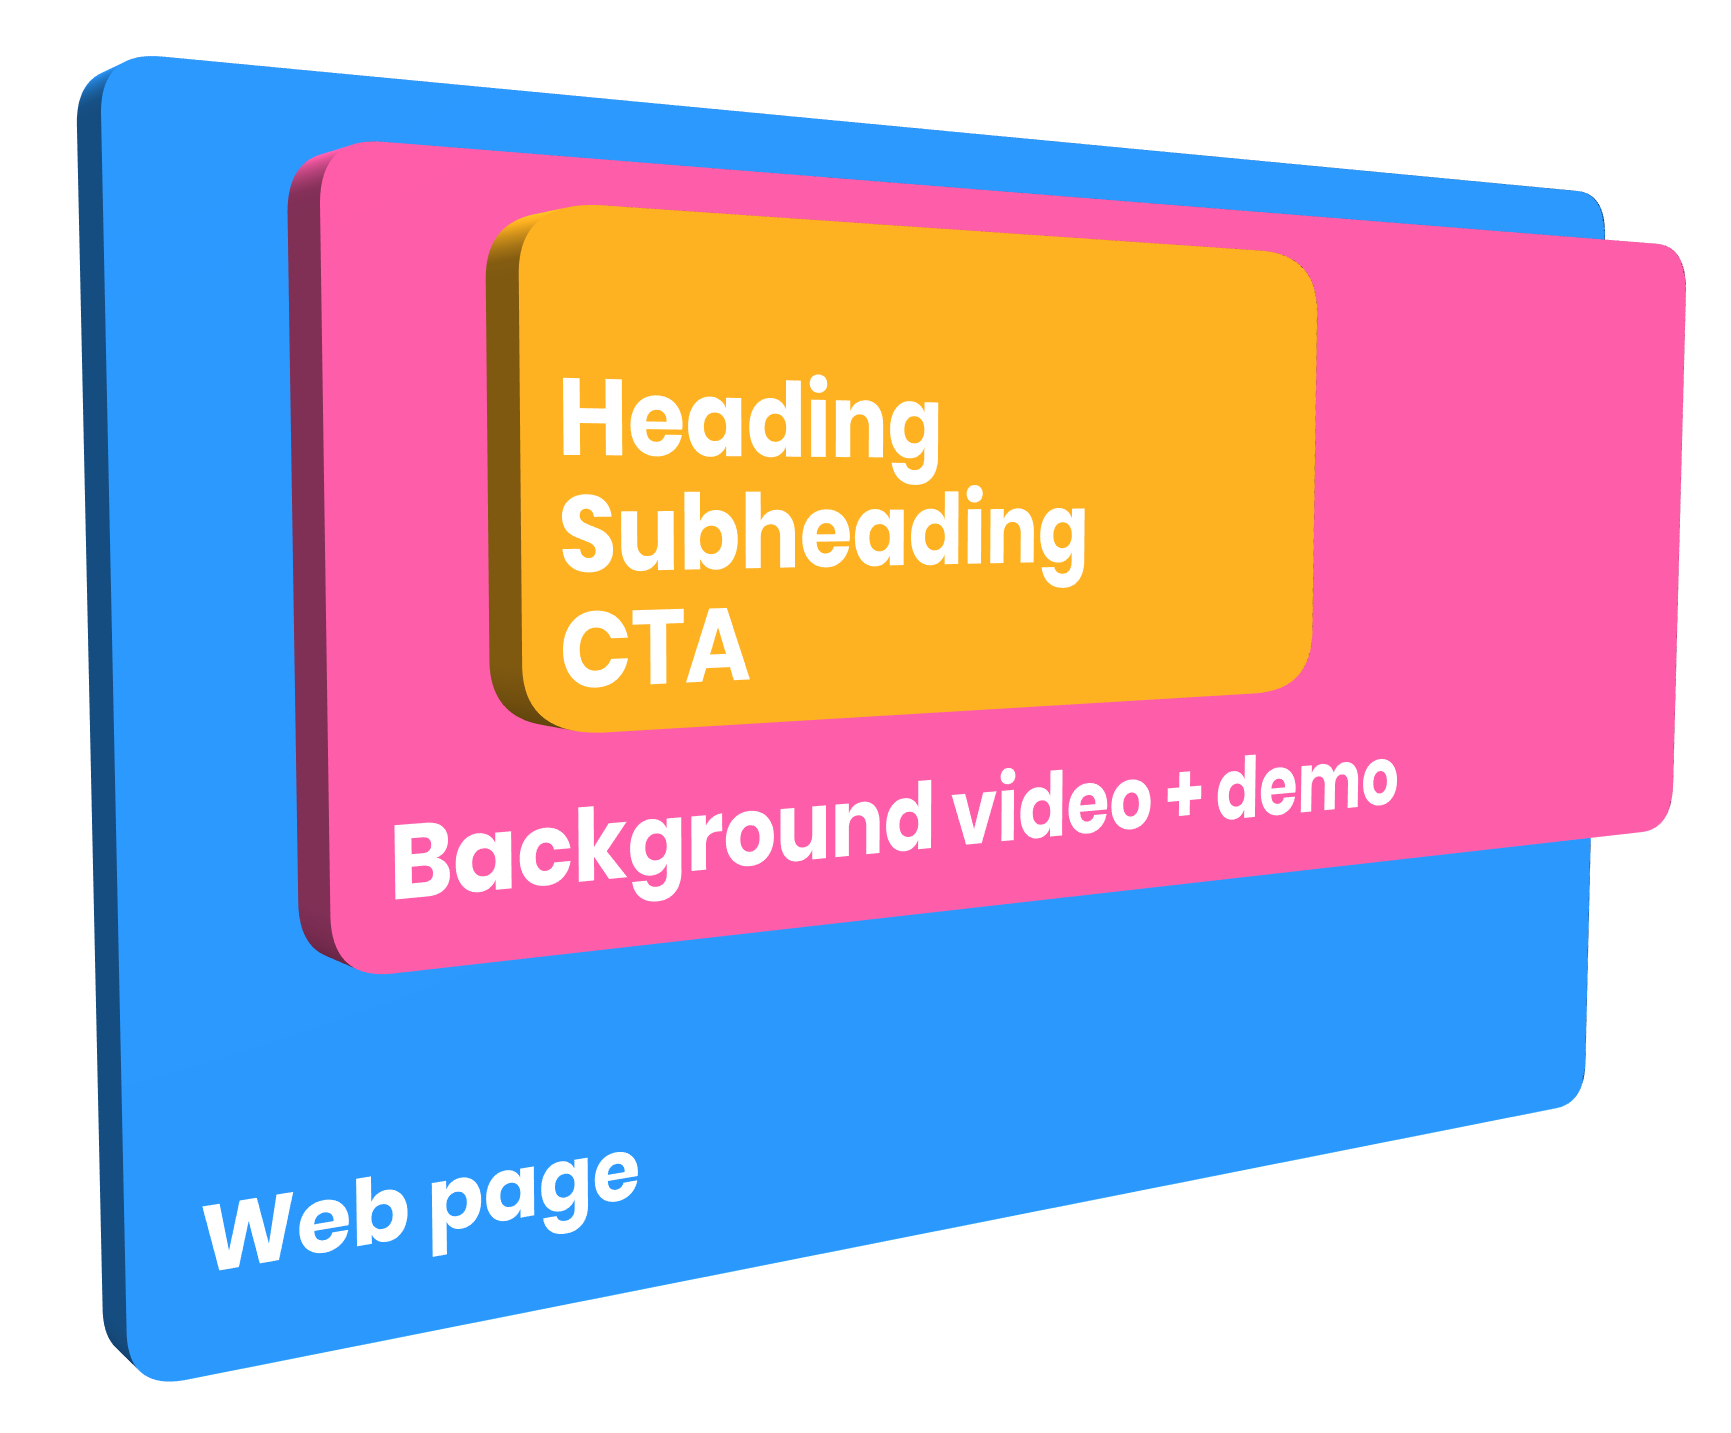 A 3D diagram showing the background video and demo has been combined into one video